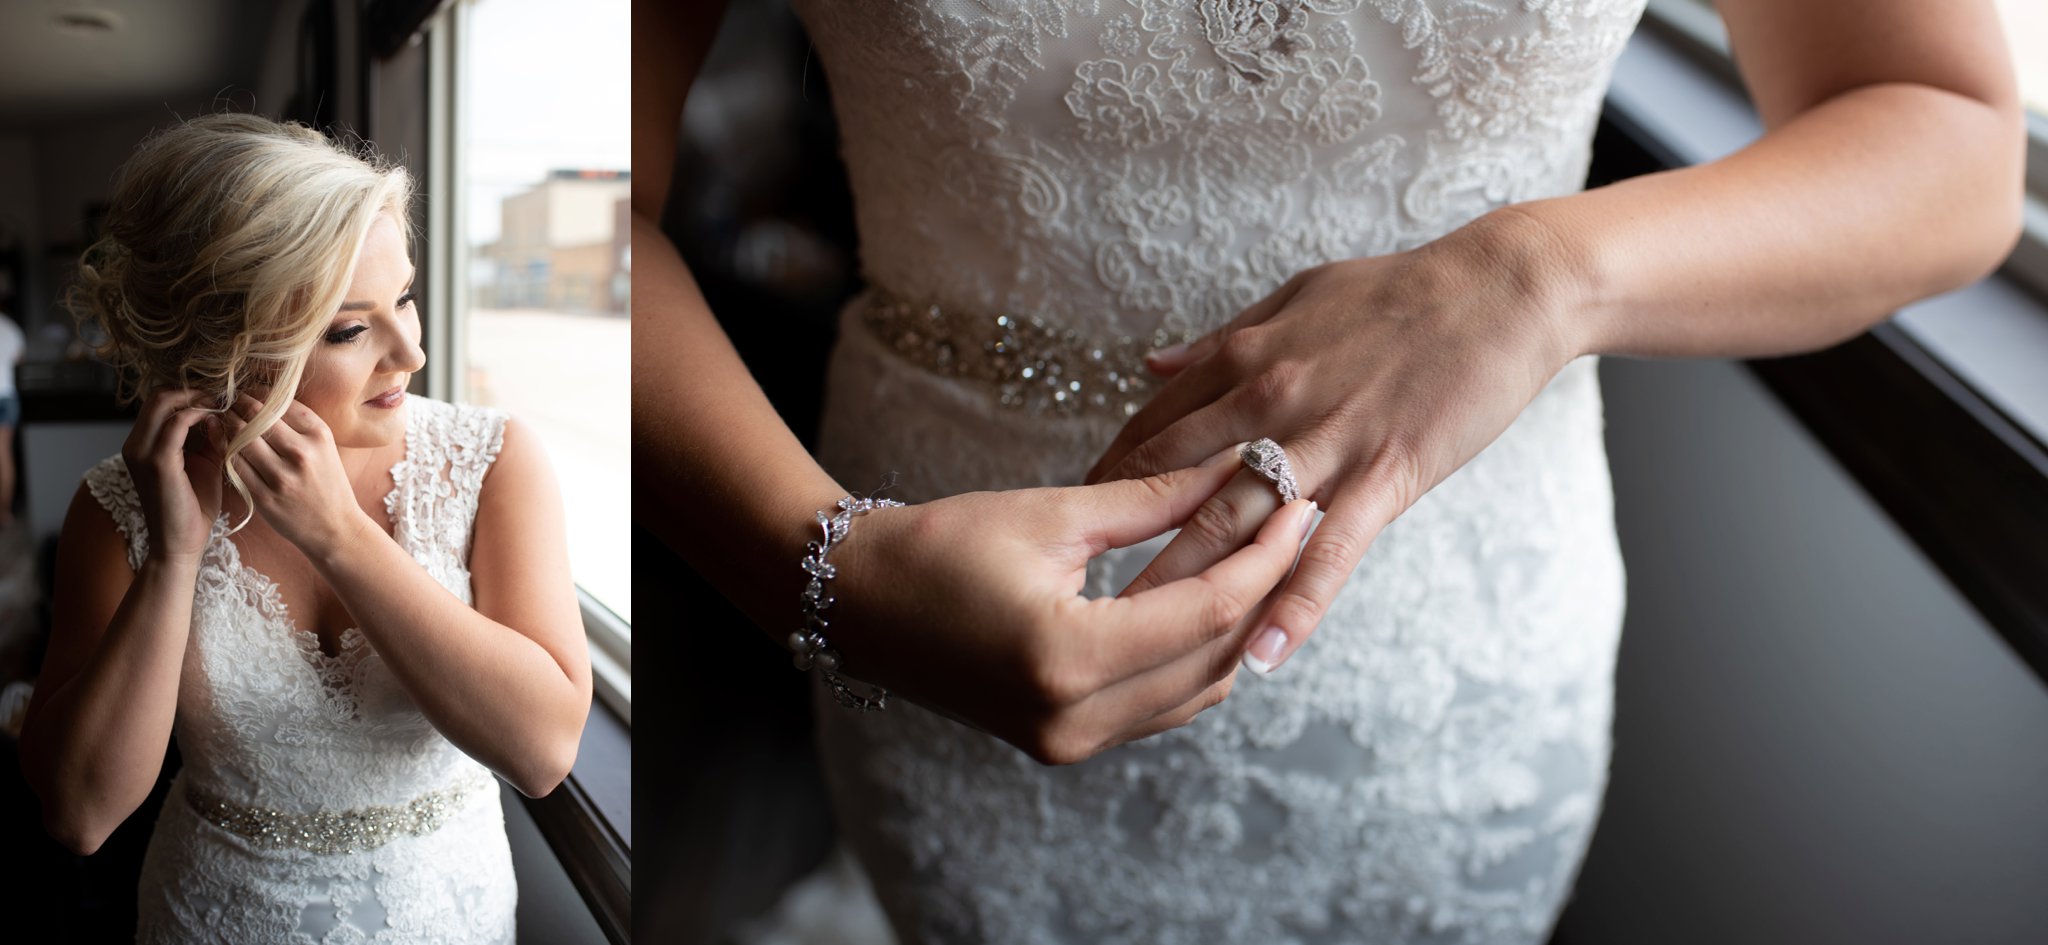 bride puts on wedding ring and earrings